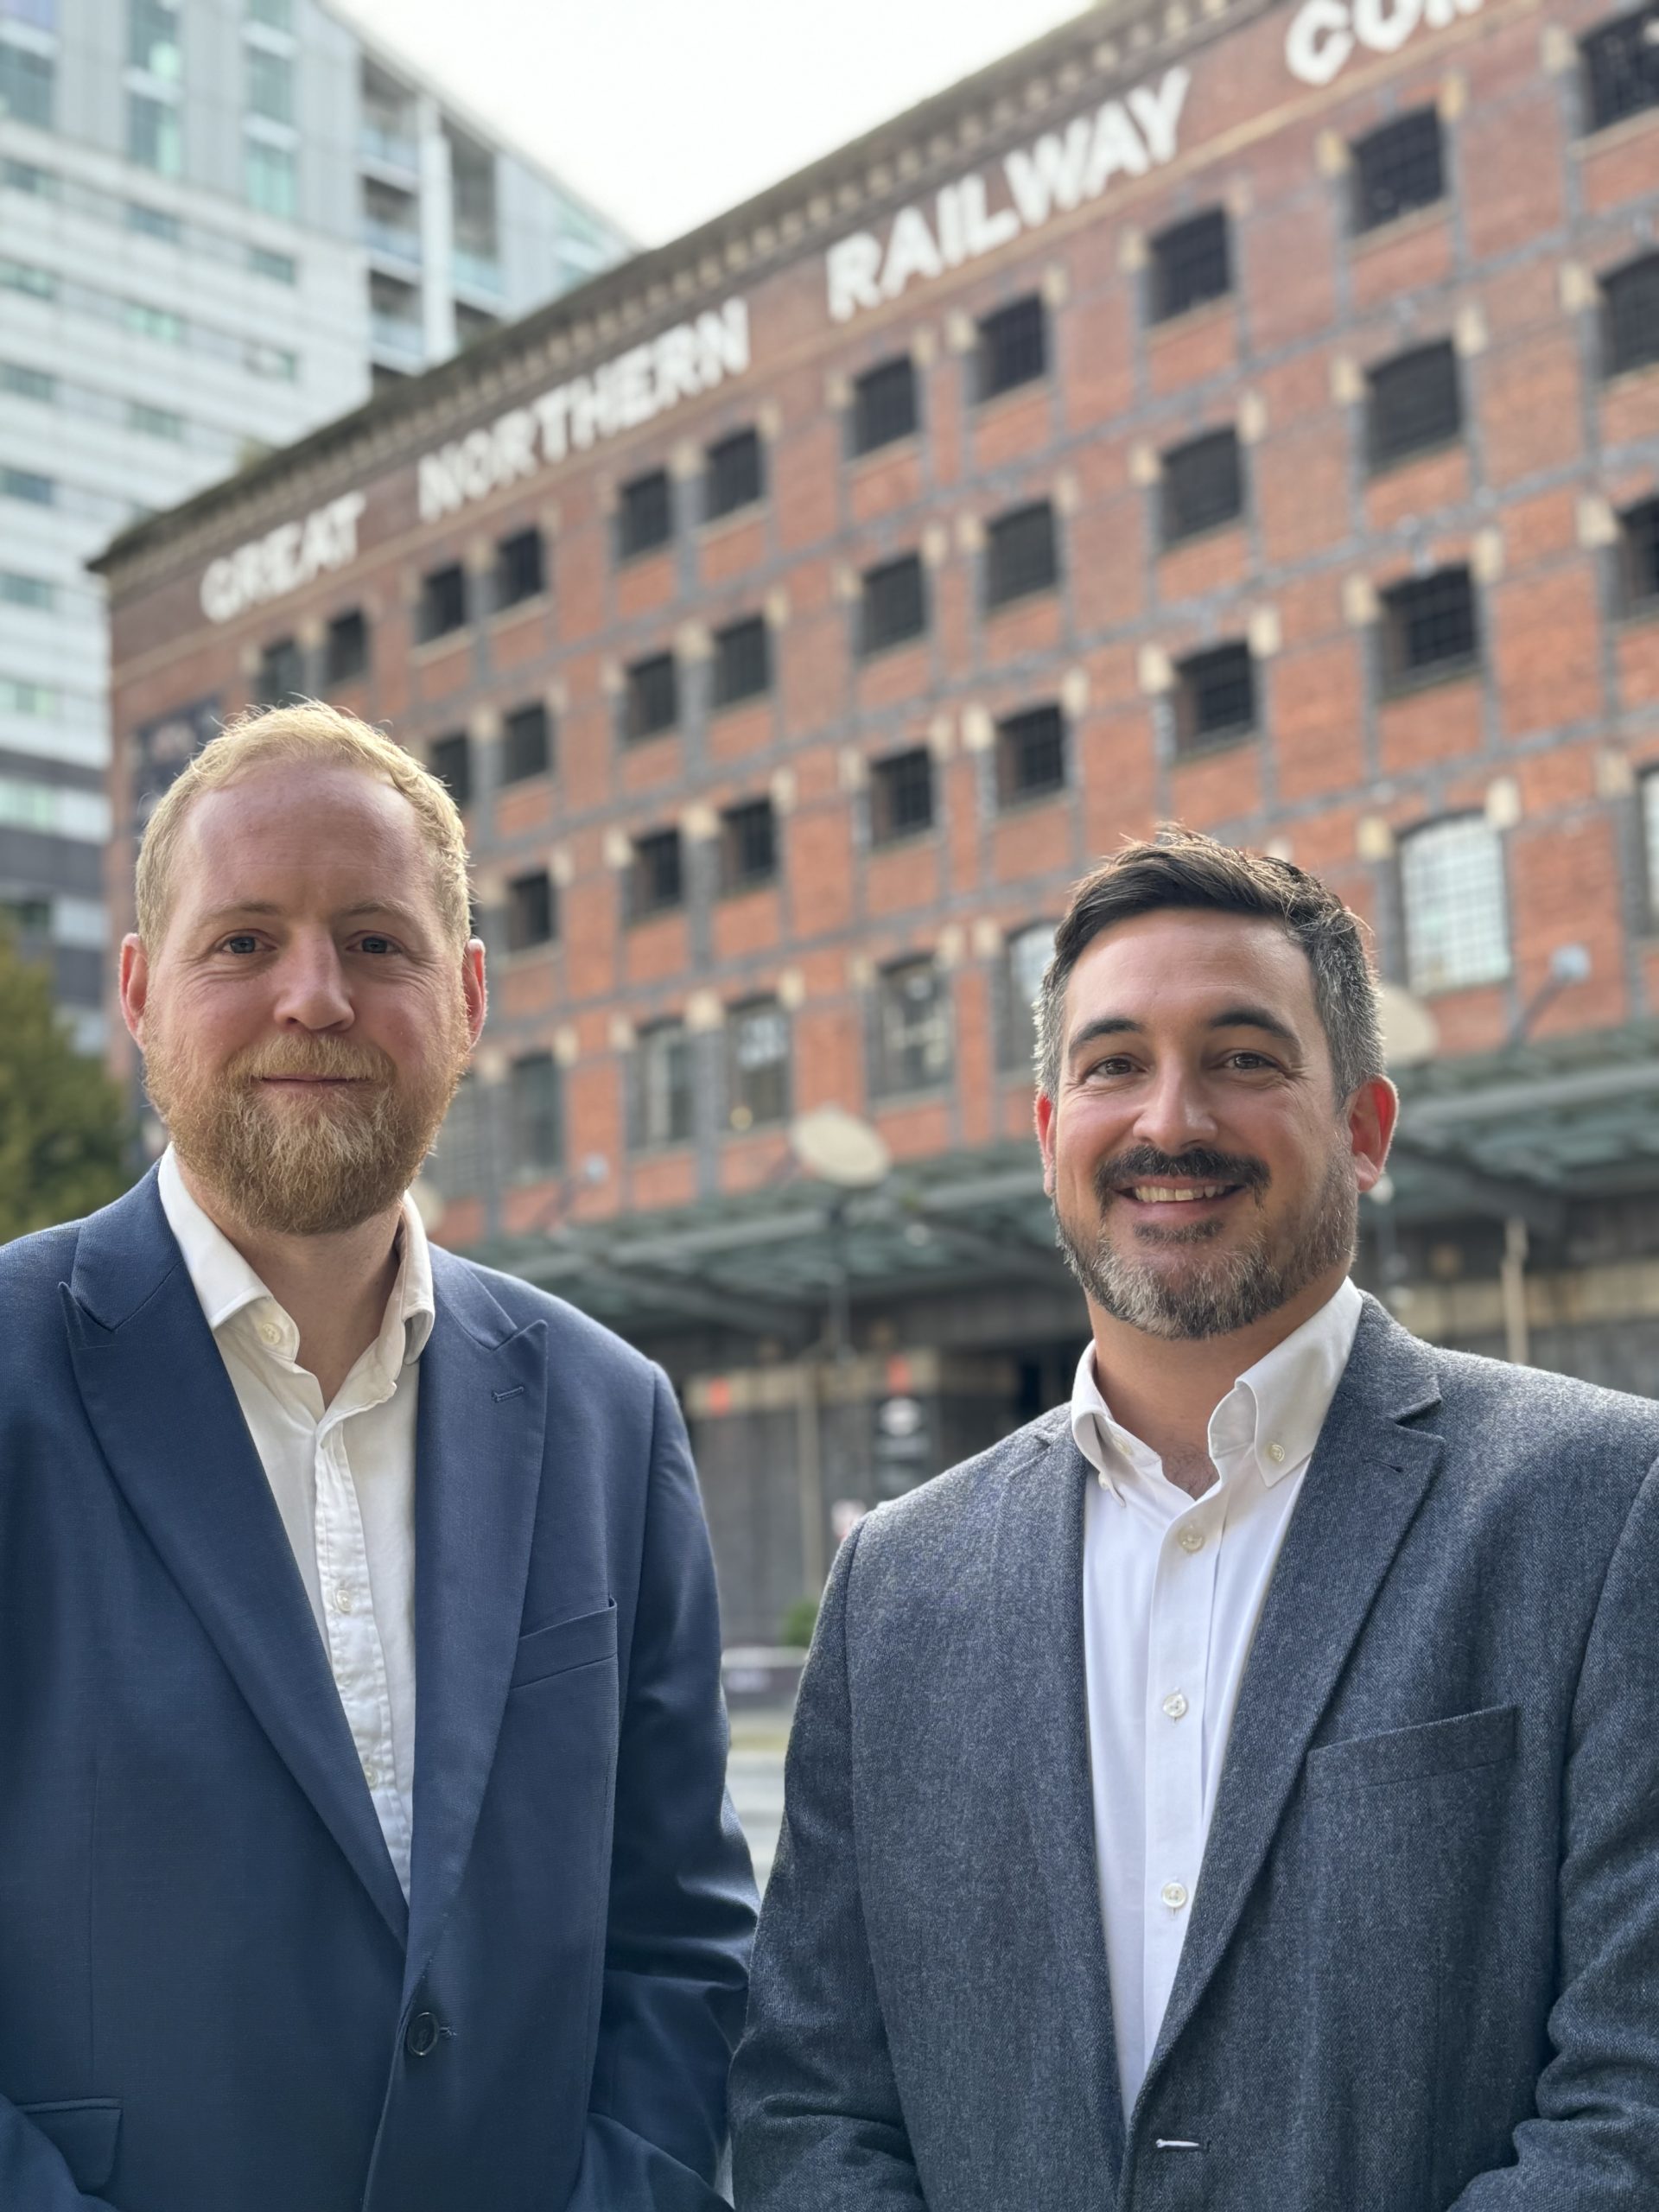 Watling Real Estate Ian Whittaker and Chris Walker scaled 1 1 Manchester office of Watling Real Estate announces another key hire at director level